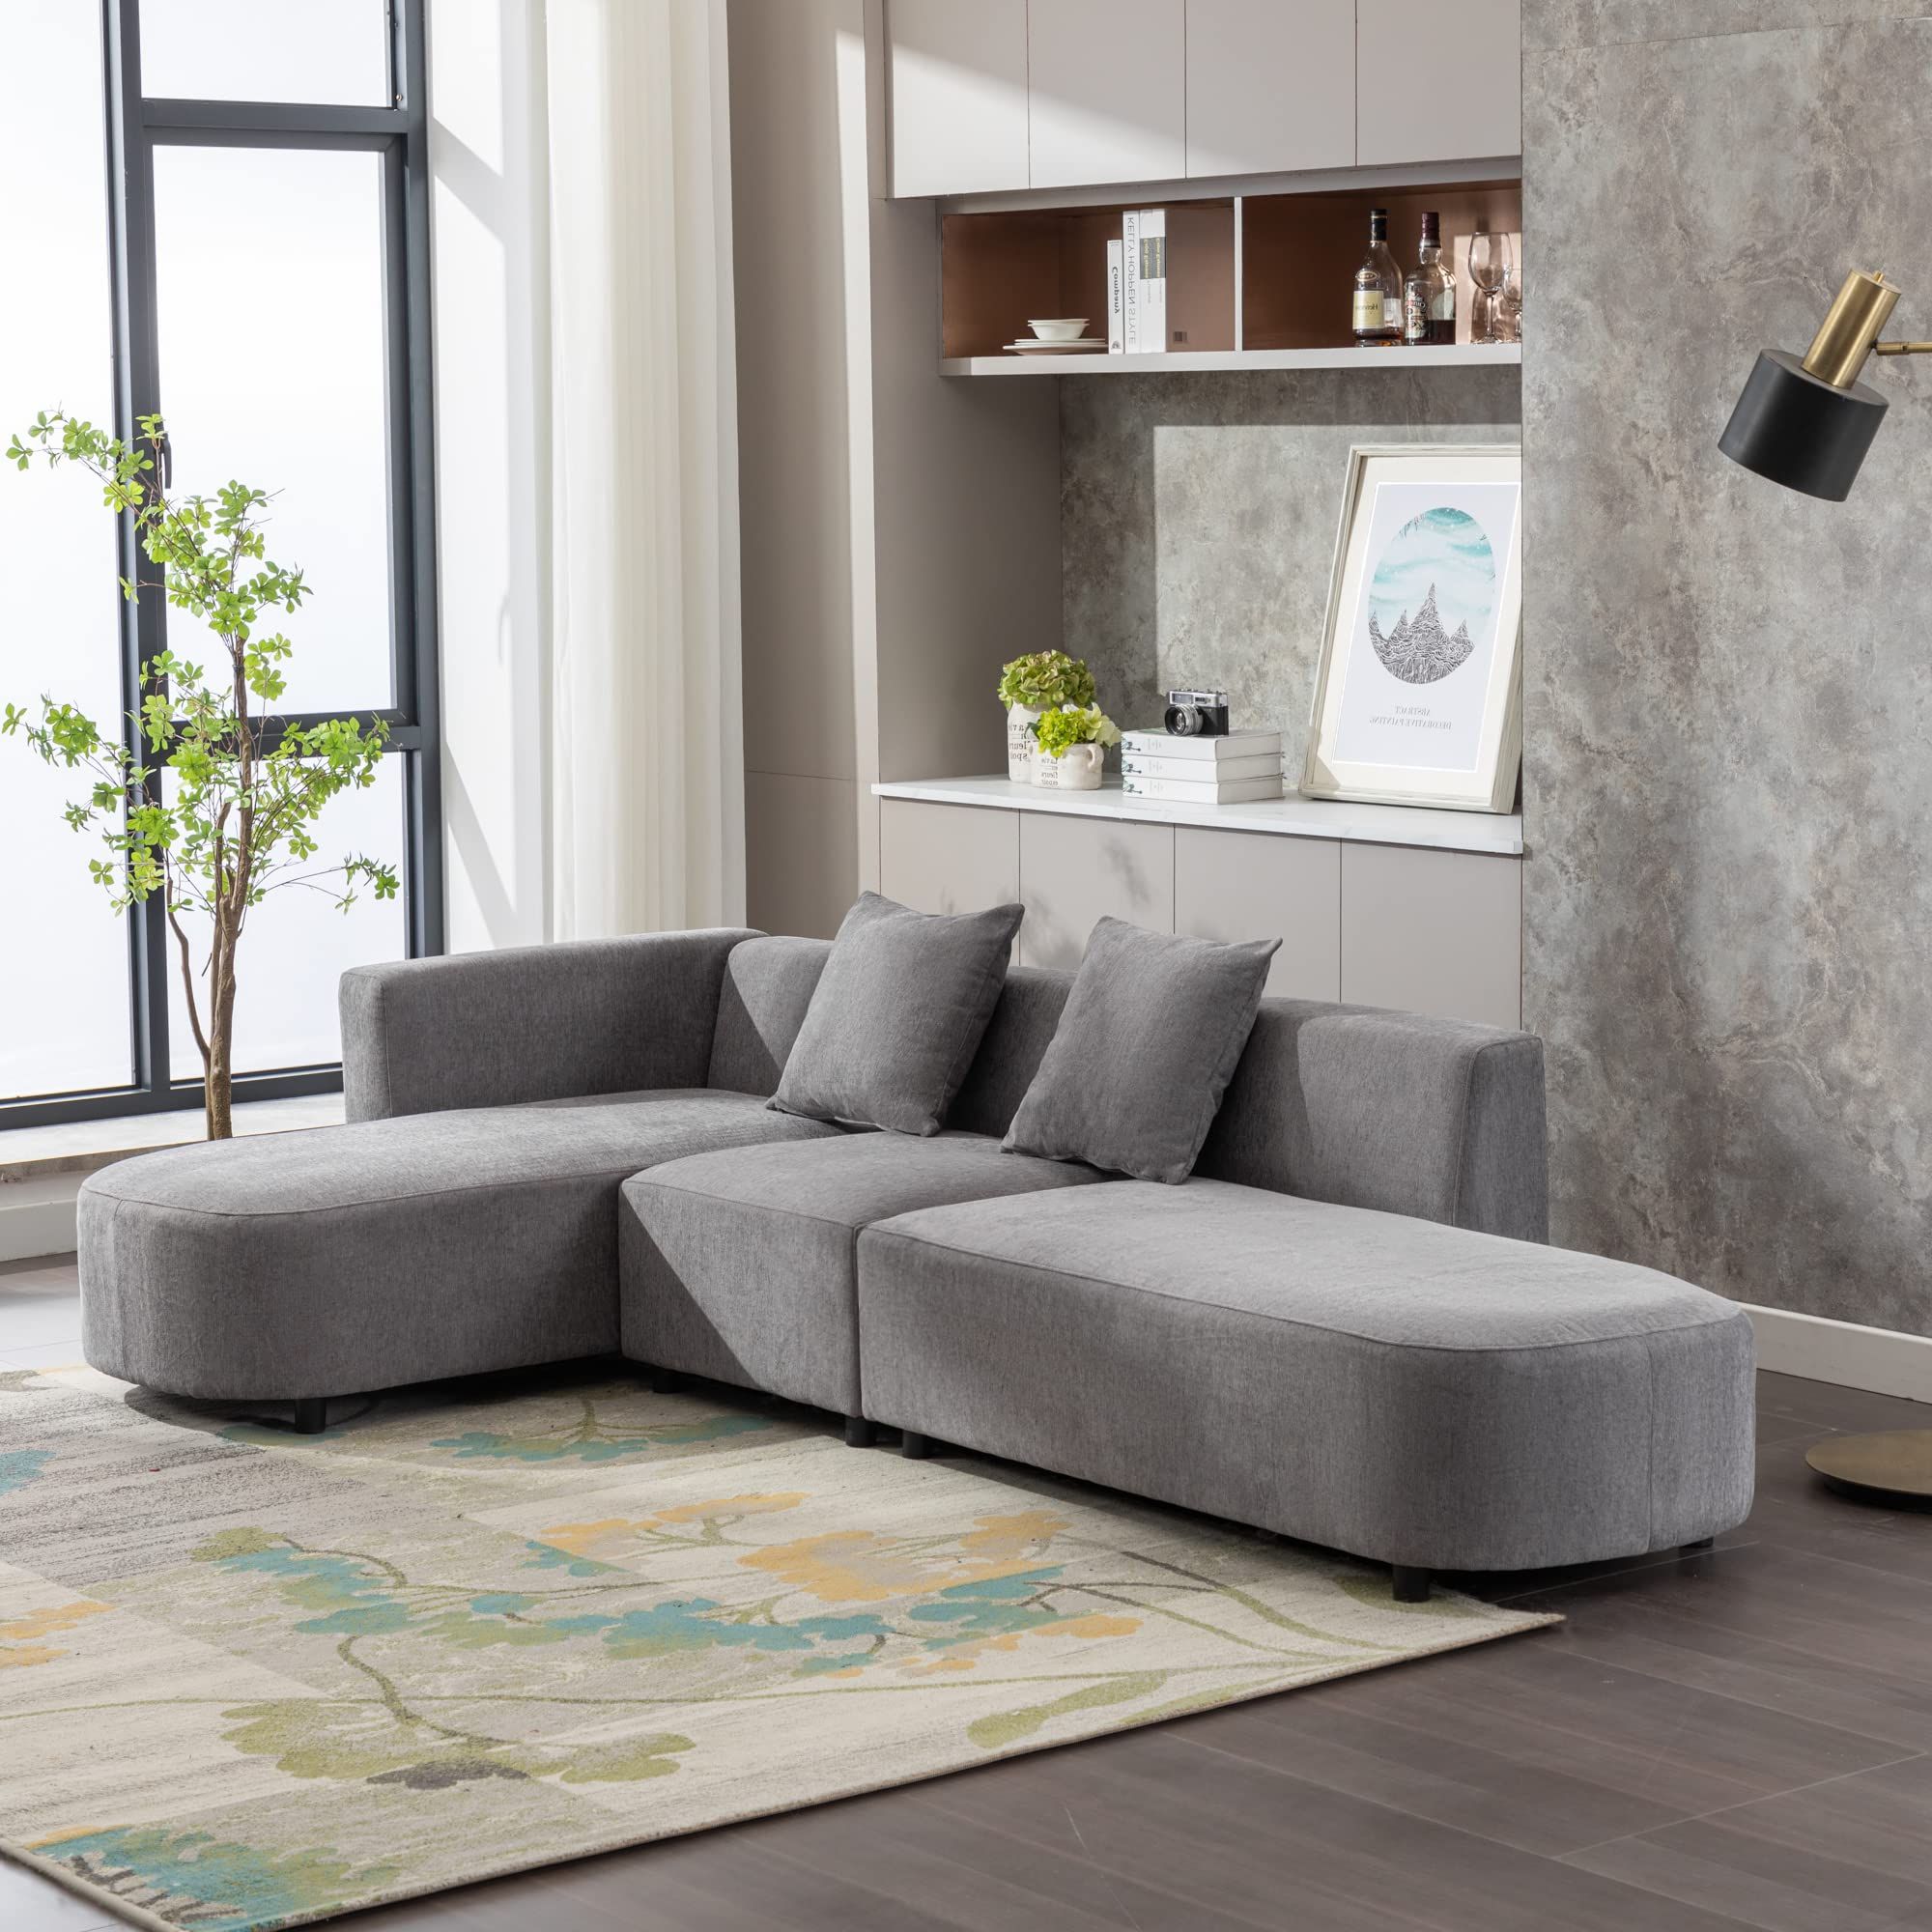 Popular 3 Piece Curved Sectional Set Pertaining To Amazon: Merax Luxury Modern Living Room Sofa Sectional Upholstery Couch  With Chaise 3 Piece Set, L Shape Love Seats, Gray : Home & Kitchen (View 13 of 15)